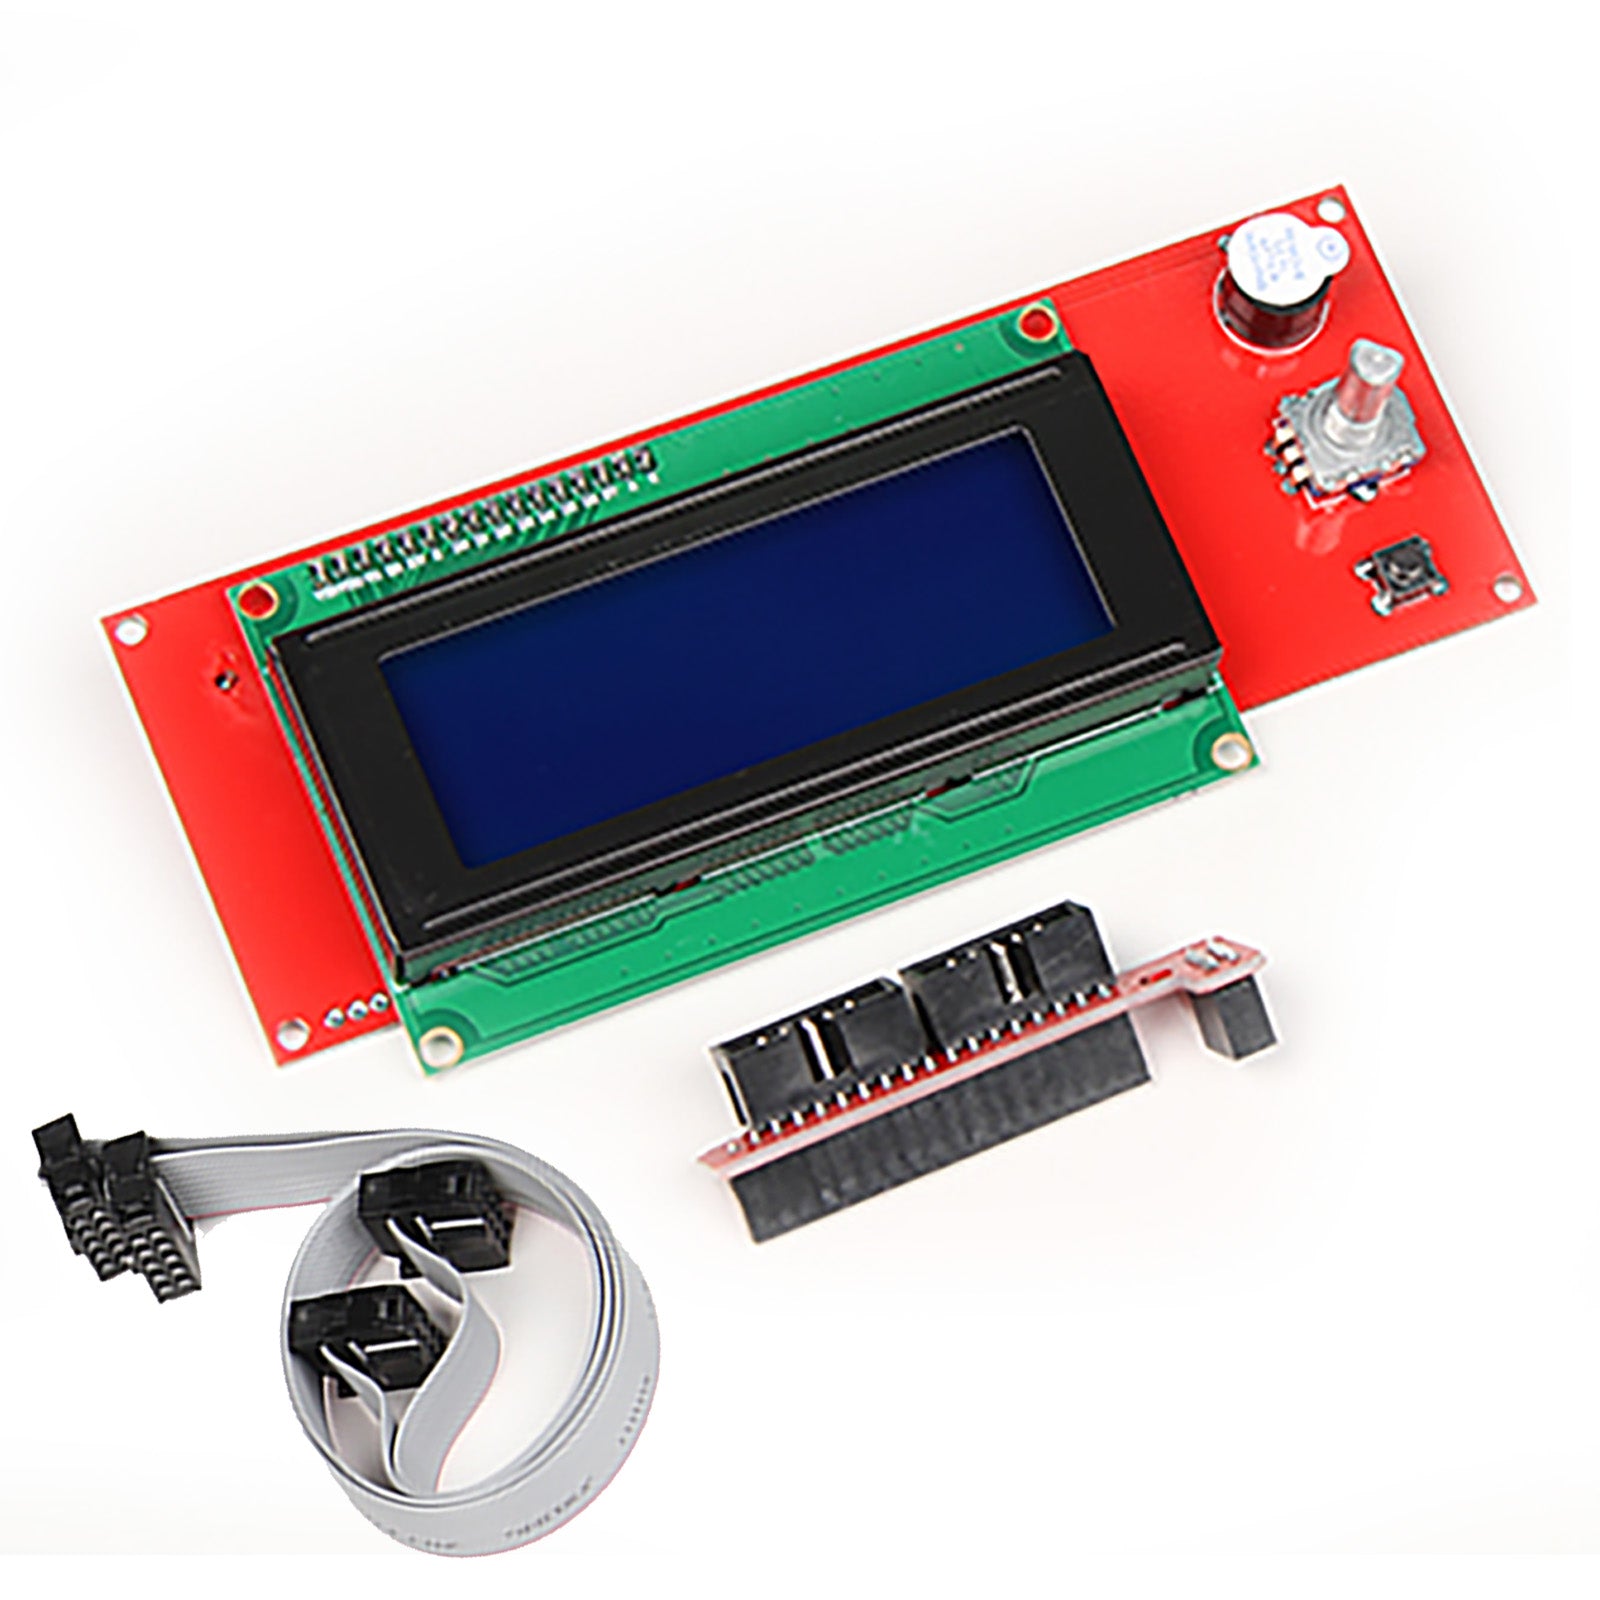 LCD Controller + SD Card Reader for RAMPS